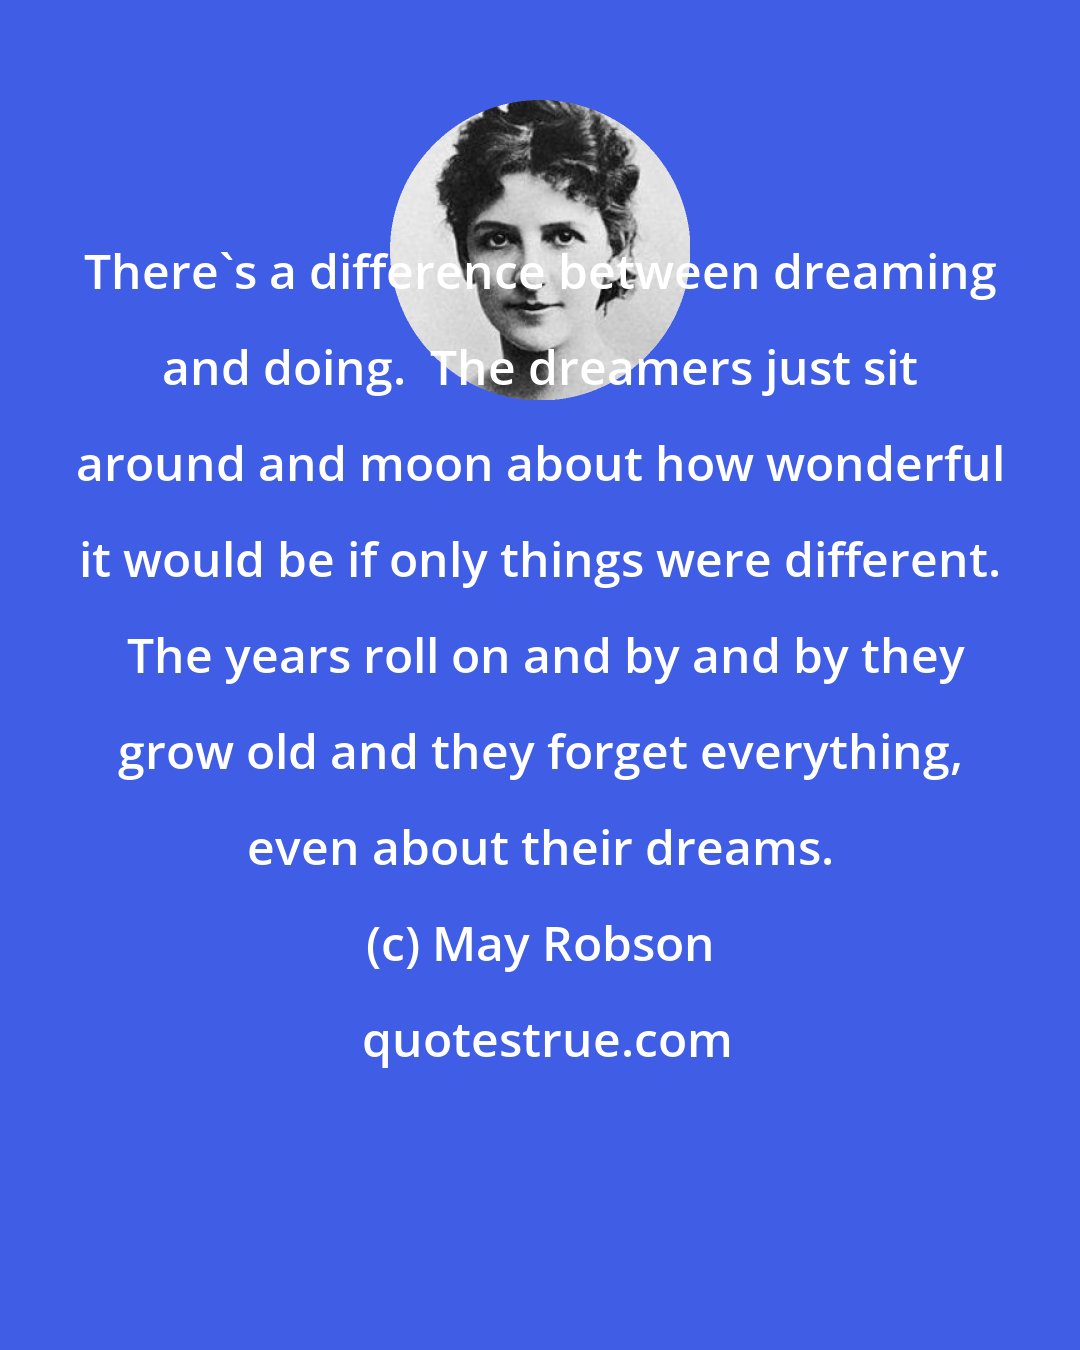 May Robson: There's a difference between dreaming and doing.  The dreamers just sit around and moon about how wonderful it would be if only things were different.  The years roll on and by and by they grow old and they forget everything, even about their dreams.